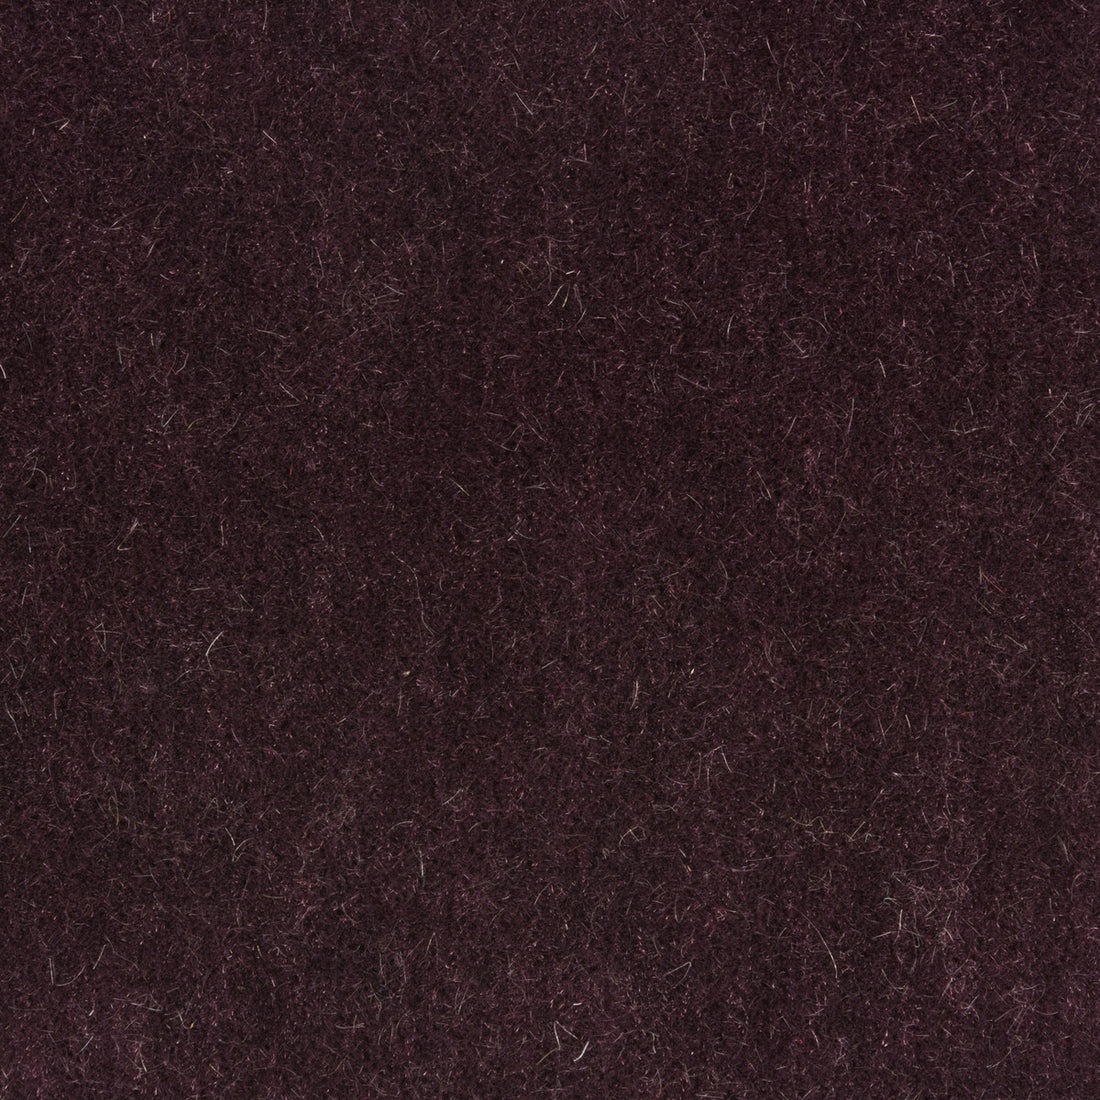 Bachelor Mohair fabric in concord color - pattern 8014101.10.0 - by Brunschwig &amp; Fils